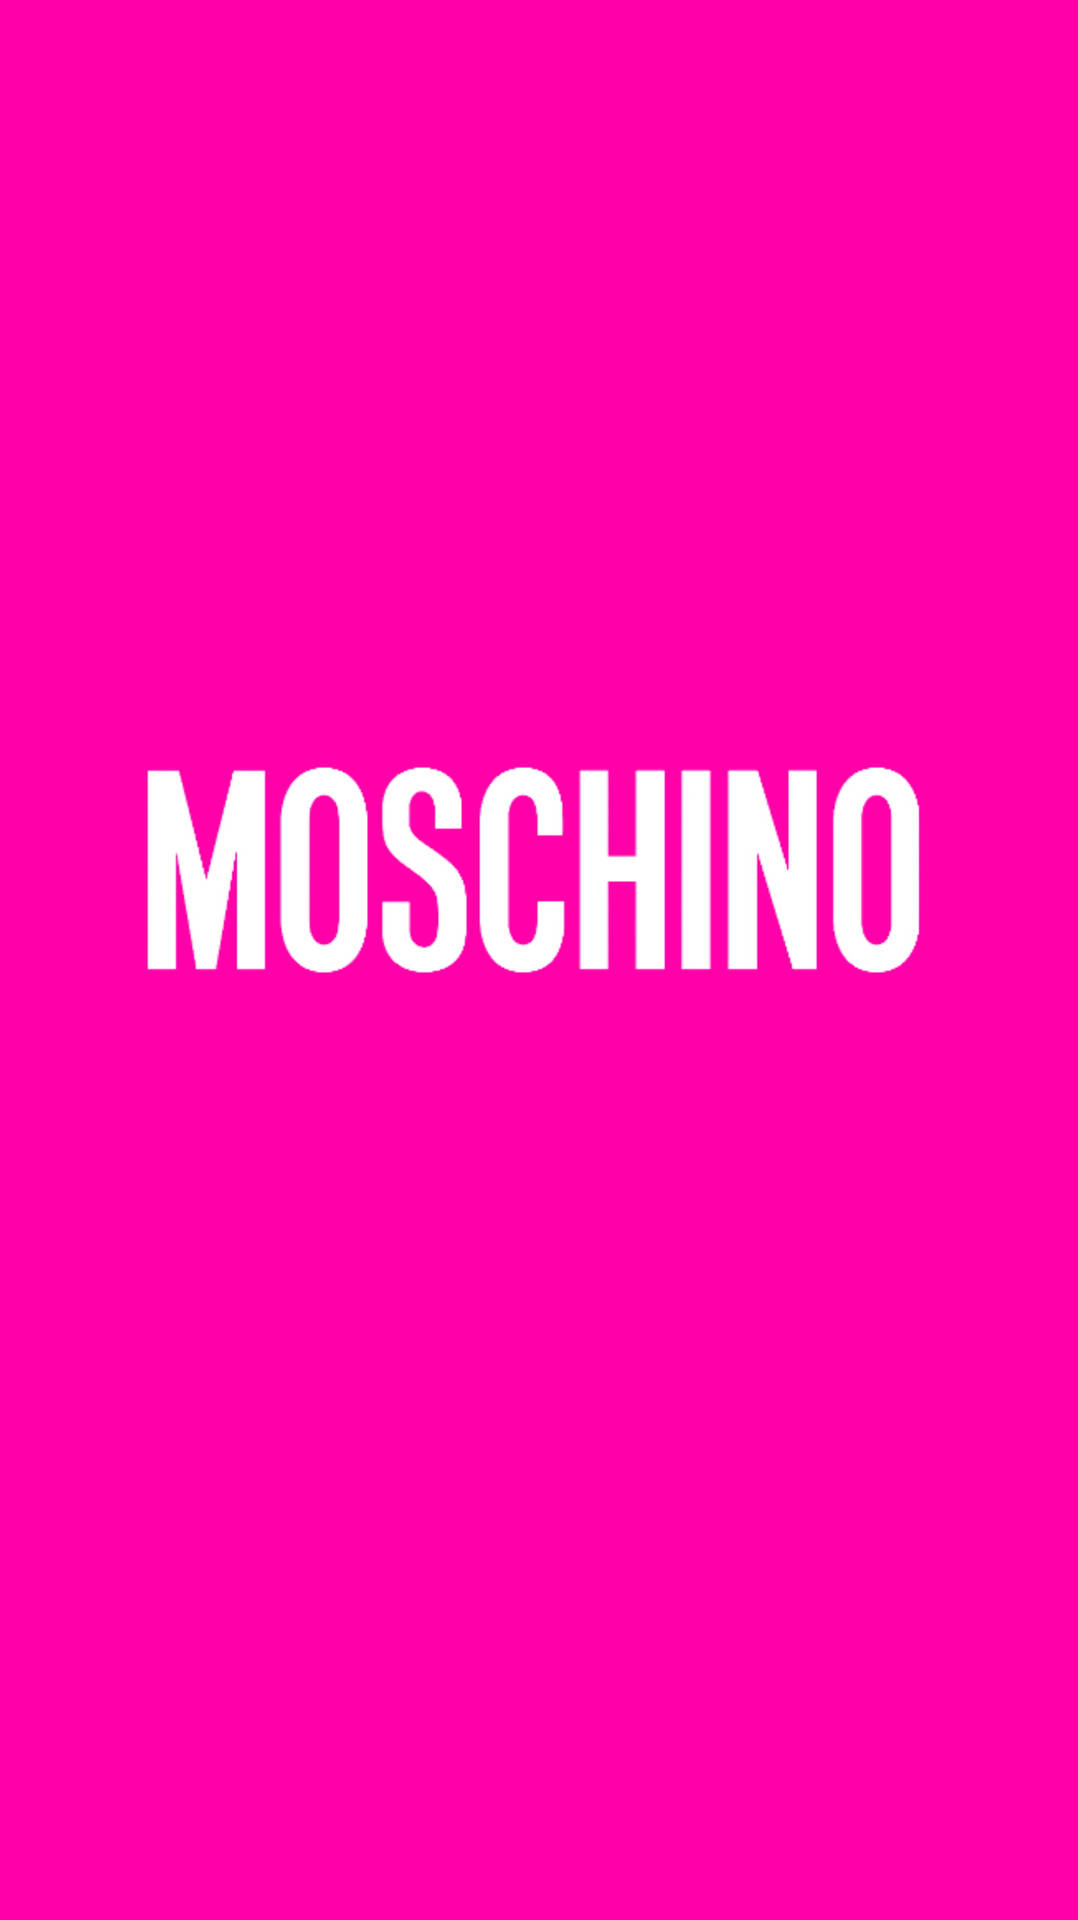 Download White And Pink Moschino Wallpaper | Wallpapers.com